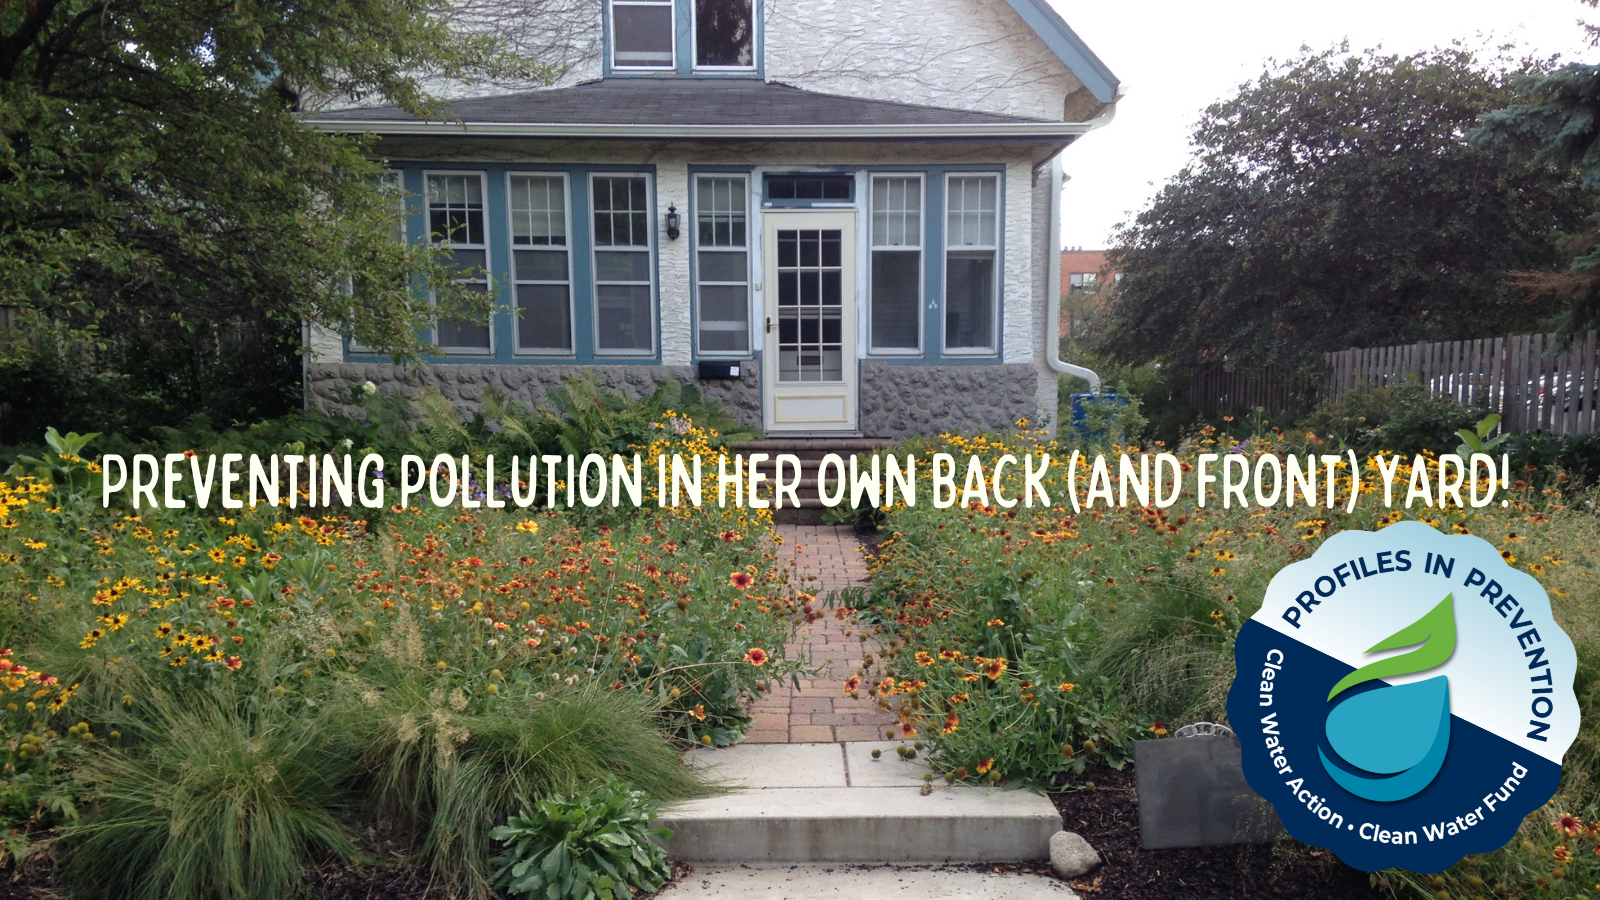 House with native wildflower garden, caption: "Preventing Pollution in her own front (And back!) Yard!)